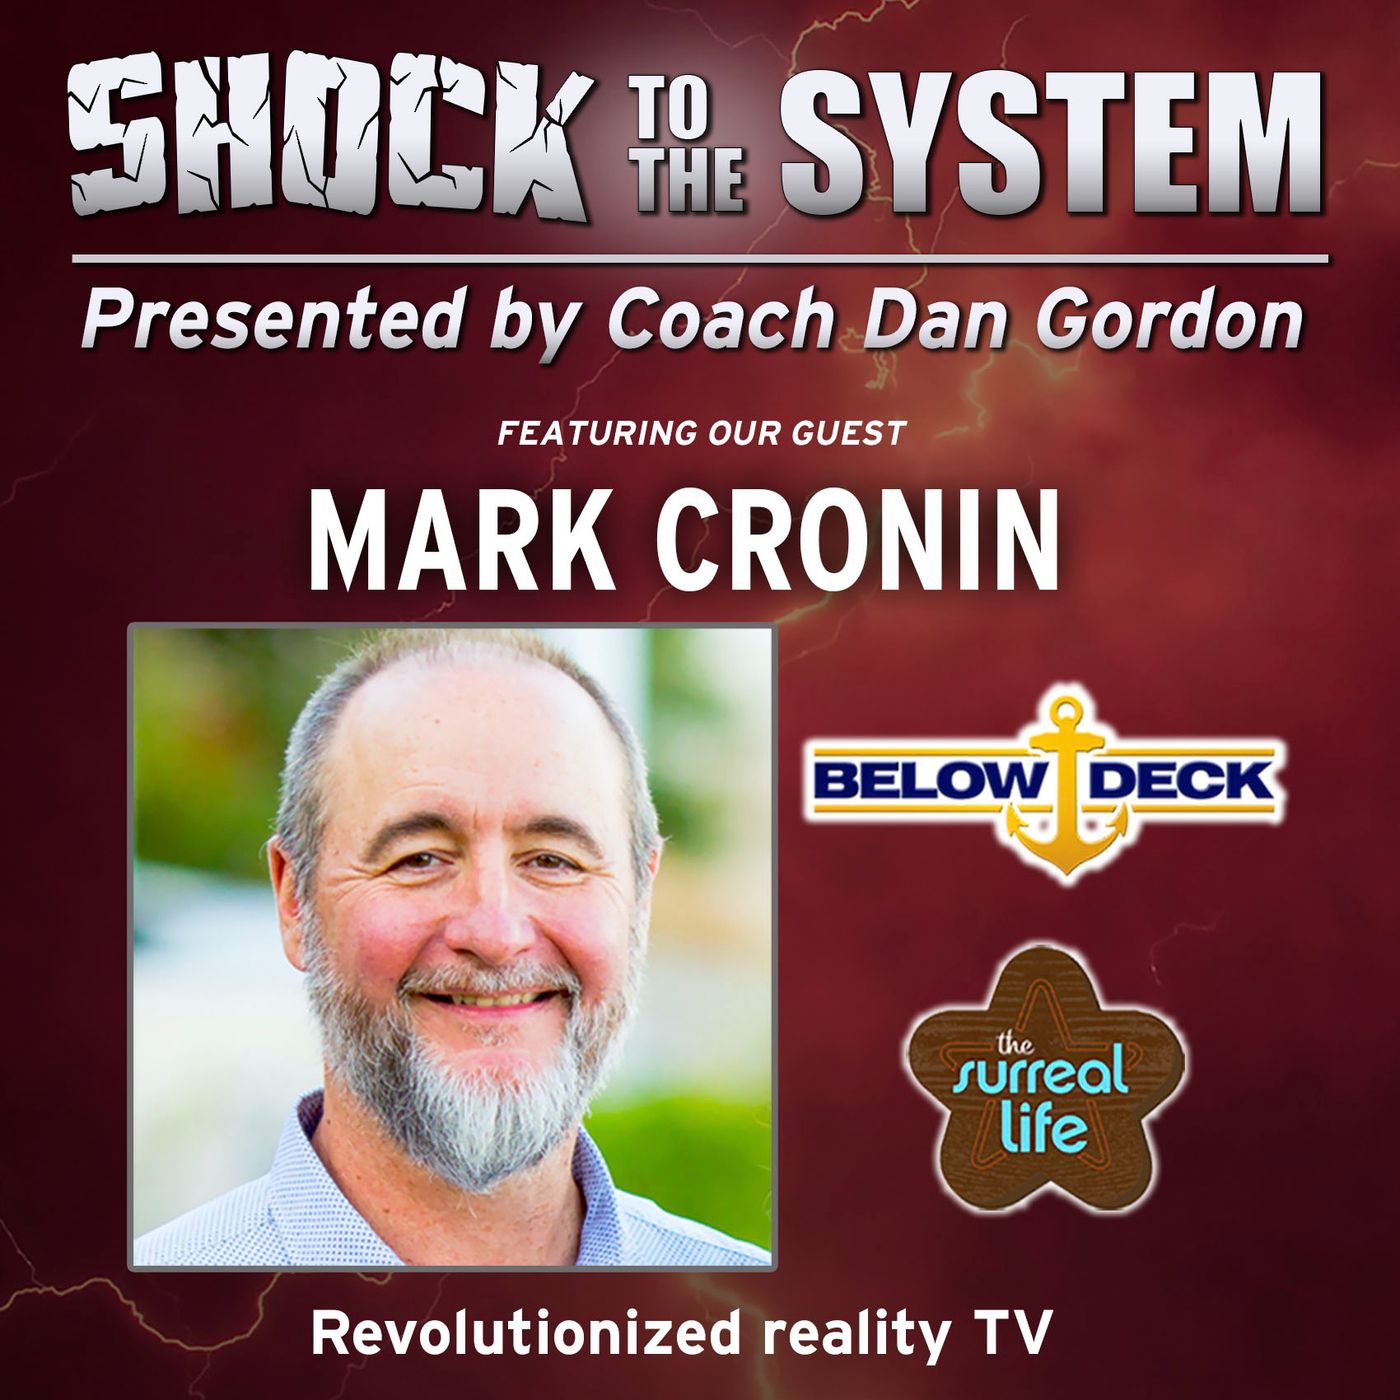 Mark Cronin - Creator of Below Deck on Shock to the System Podcast with Coach Dan Gordon